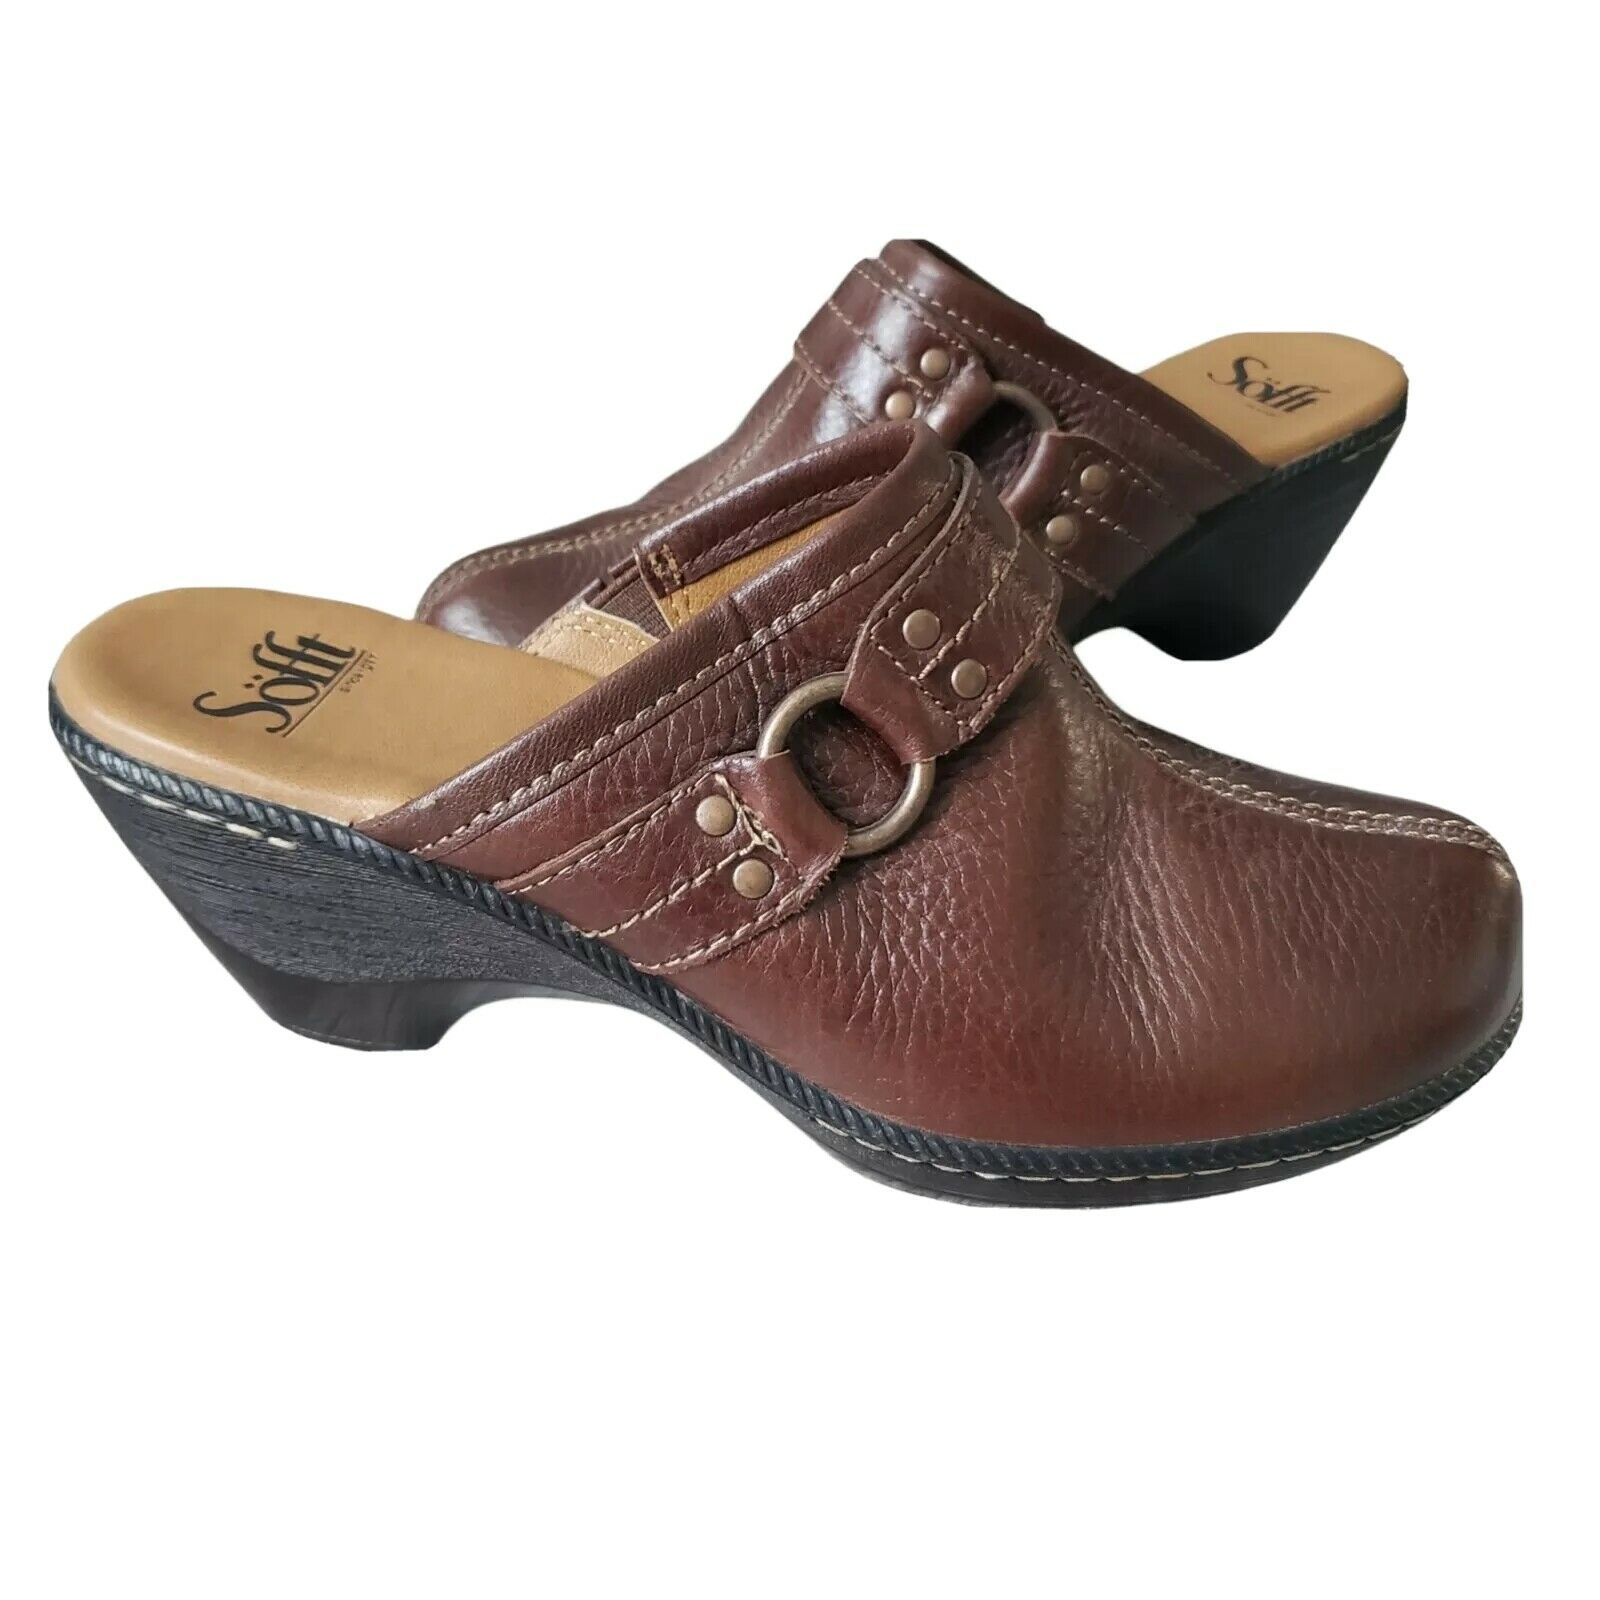 Sofft Womens Camden 1062700 Brown Solid Leather Almonds Toe Mule Shoes Size 7.5M - $31.67